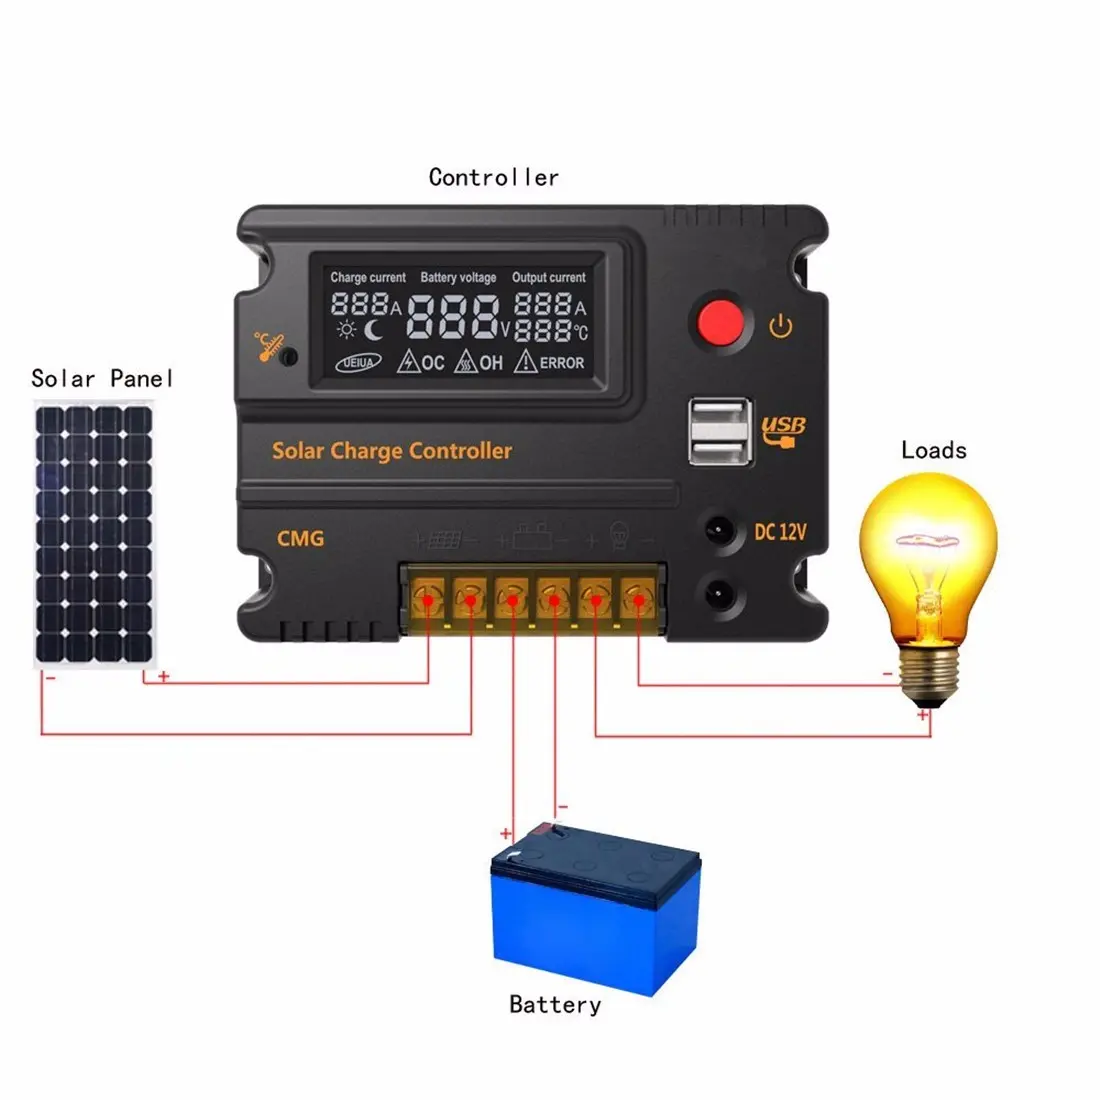 CMG-2420 20A 12V-24V LCD Display PWM Solar Panel Regulator Charge Controller with USB Port